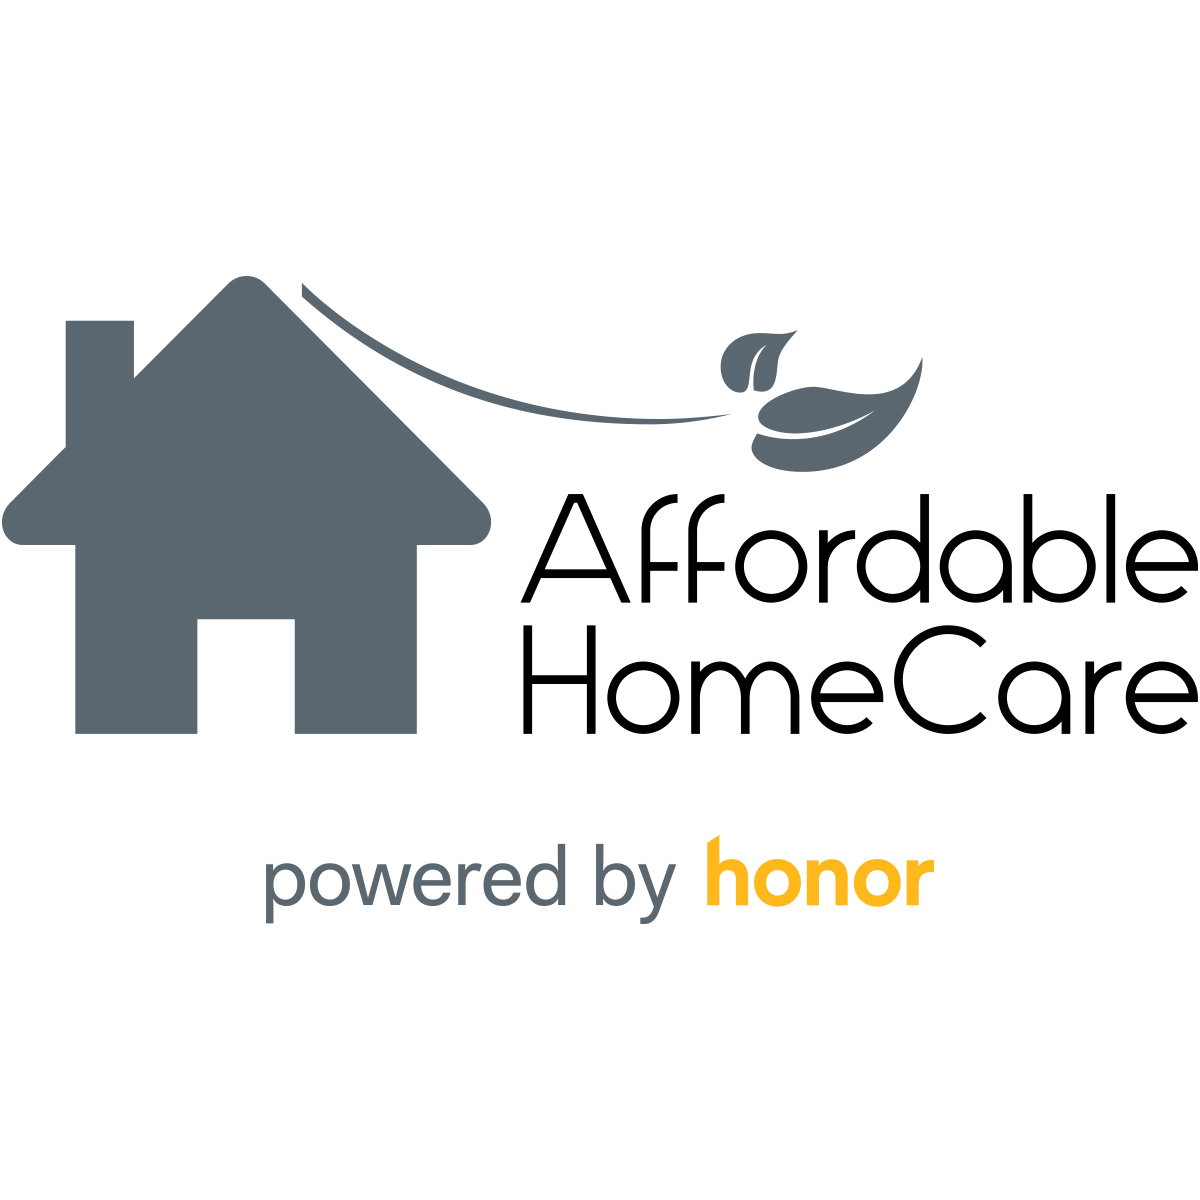 Affordable HomeCare Photo